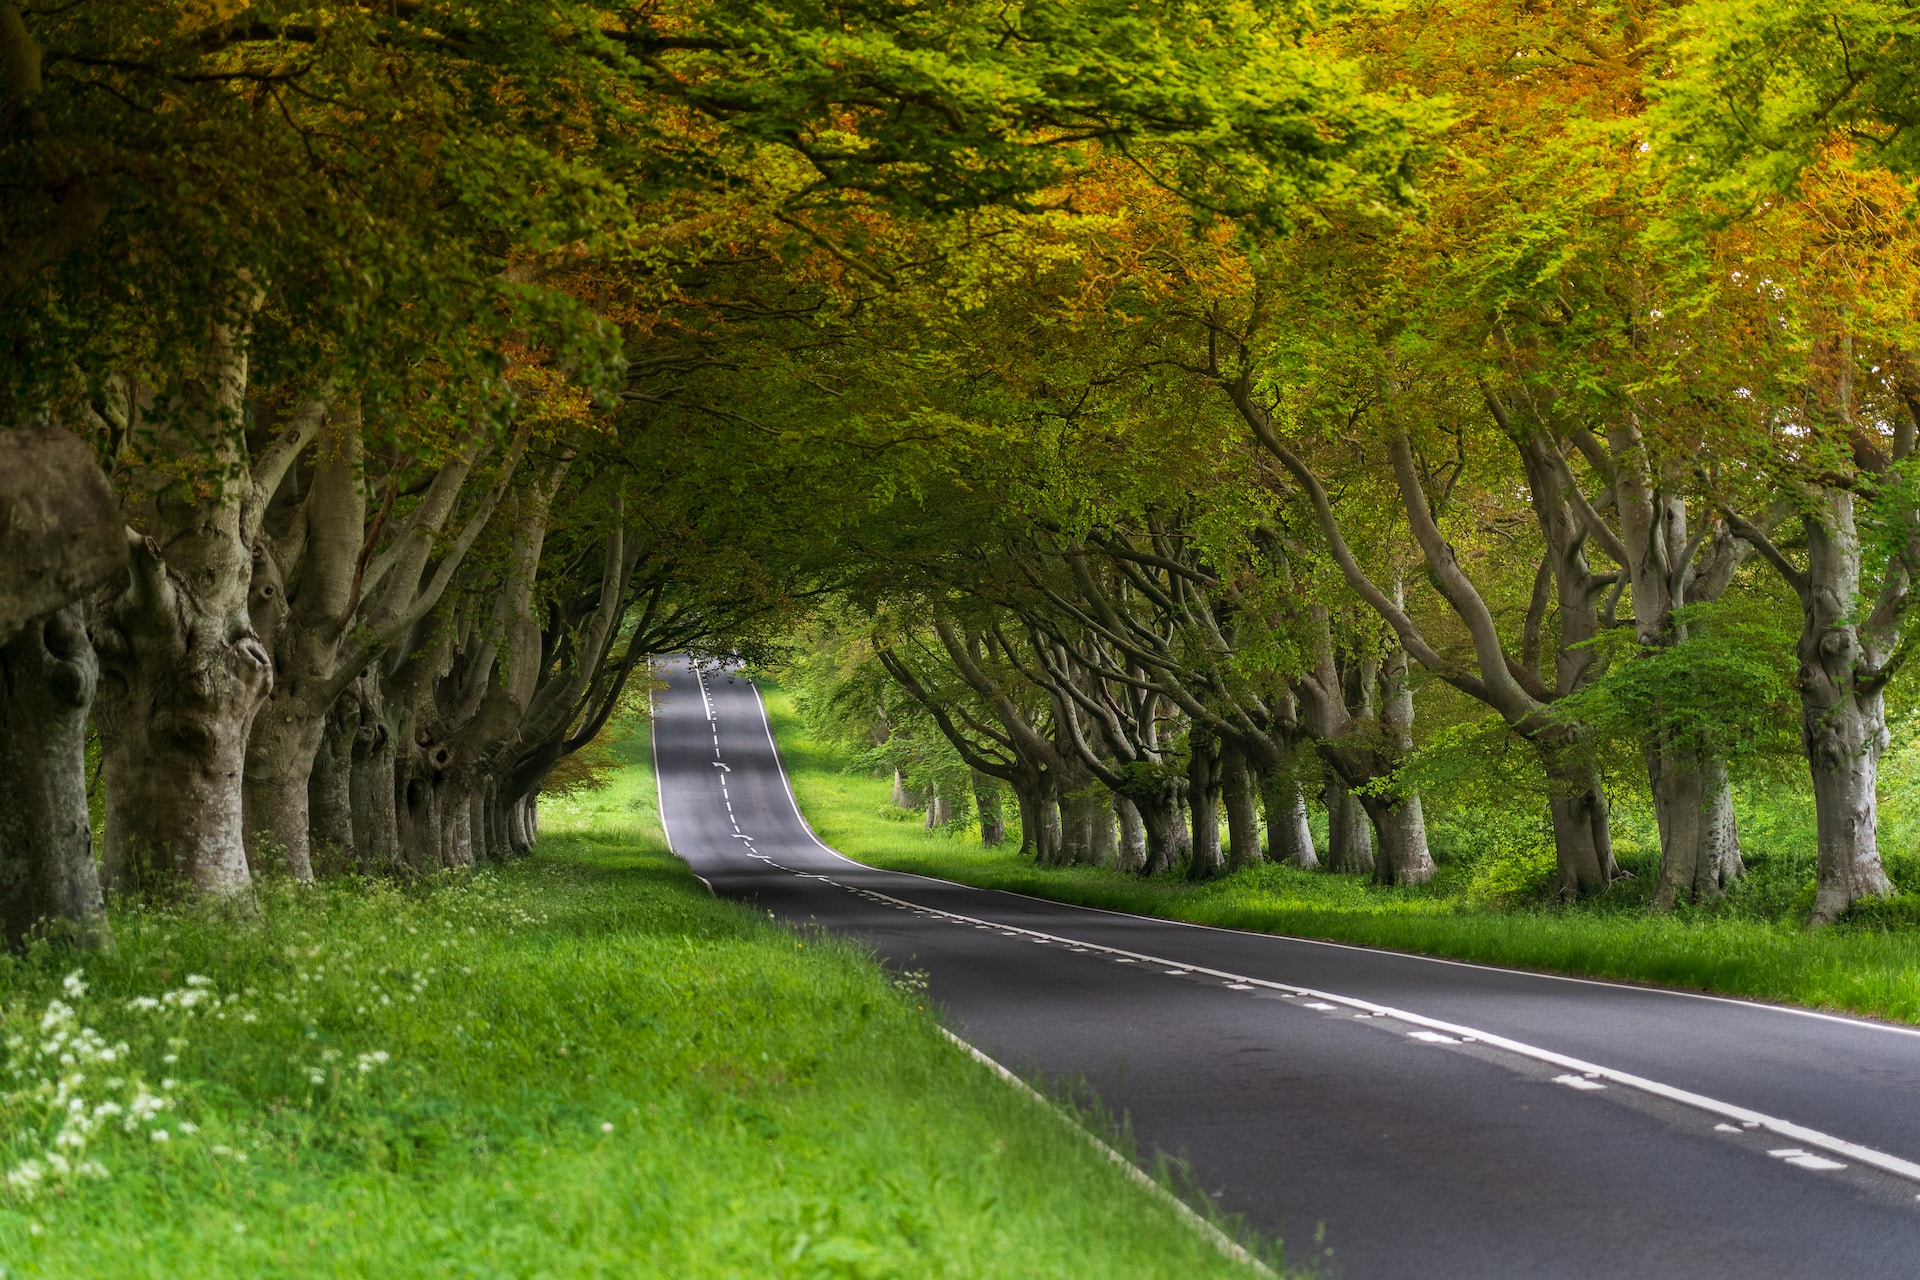 Pic of open road and trees